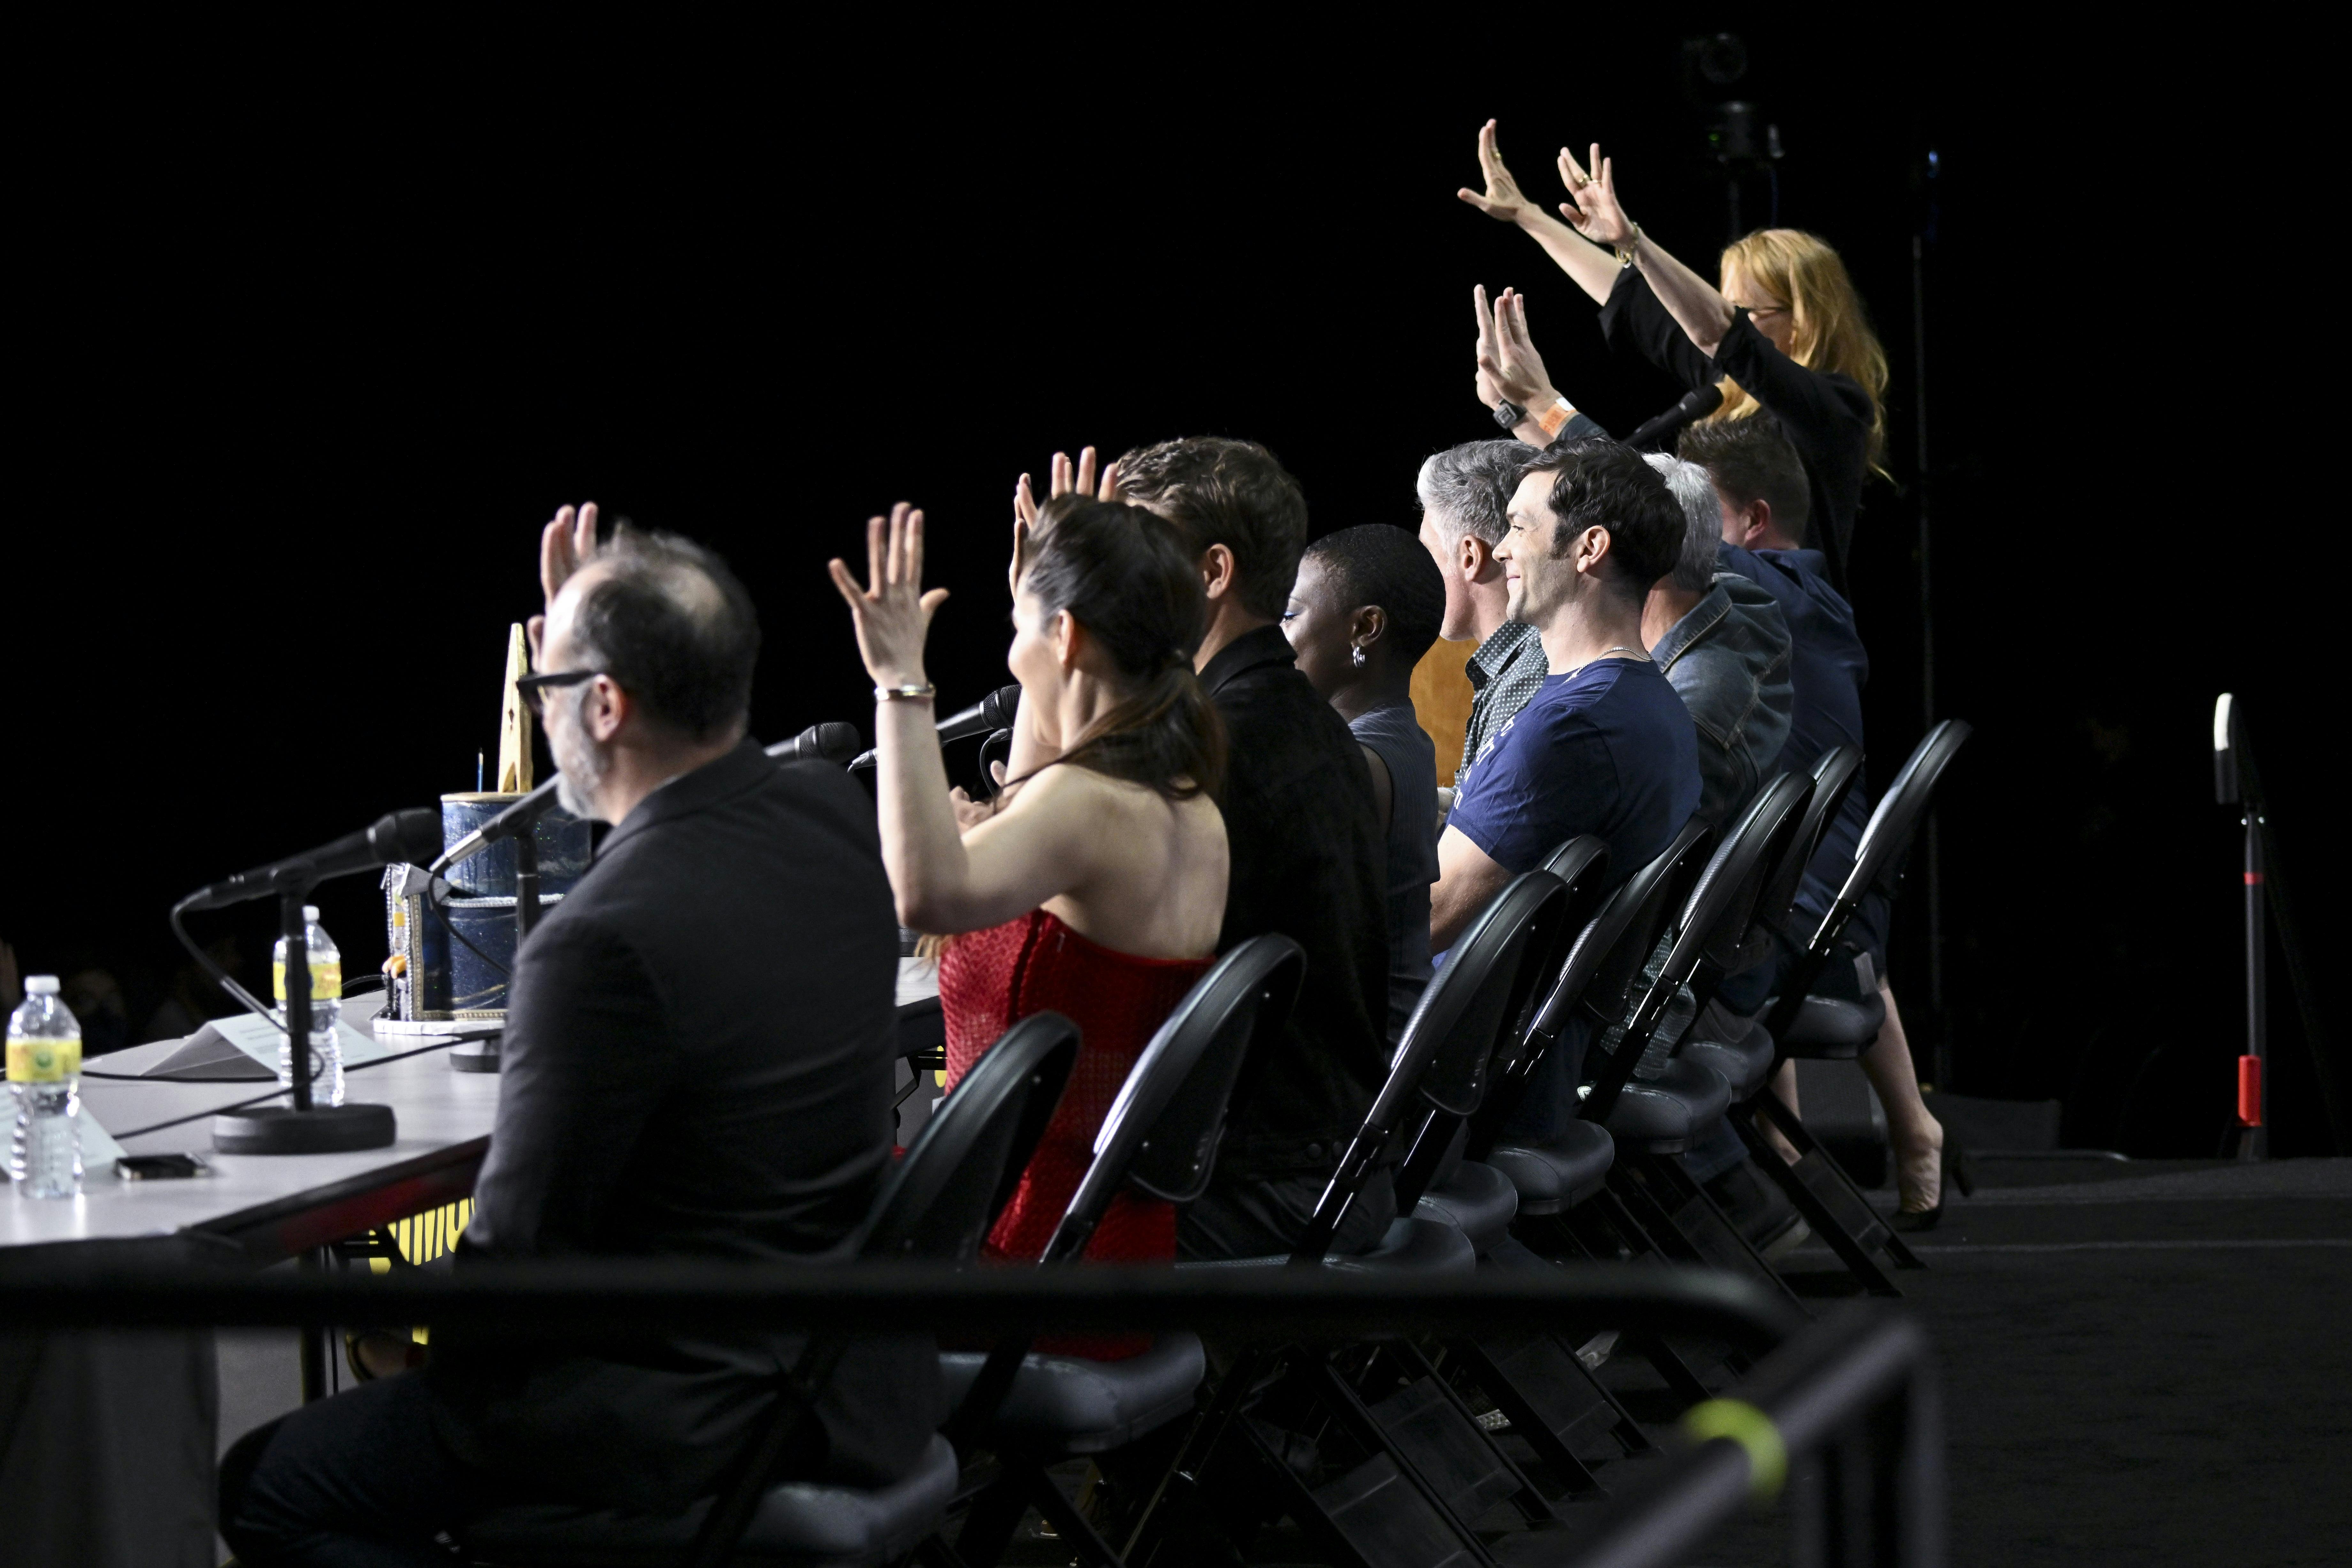 The panelists give the audience Vulcan salutes as they finish the panel.